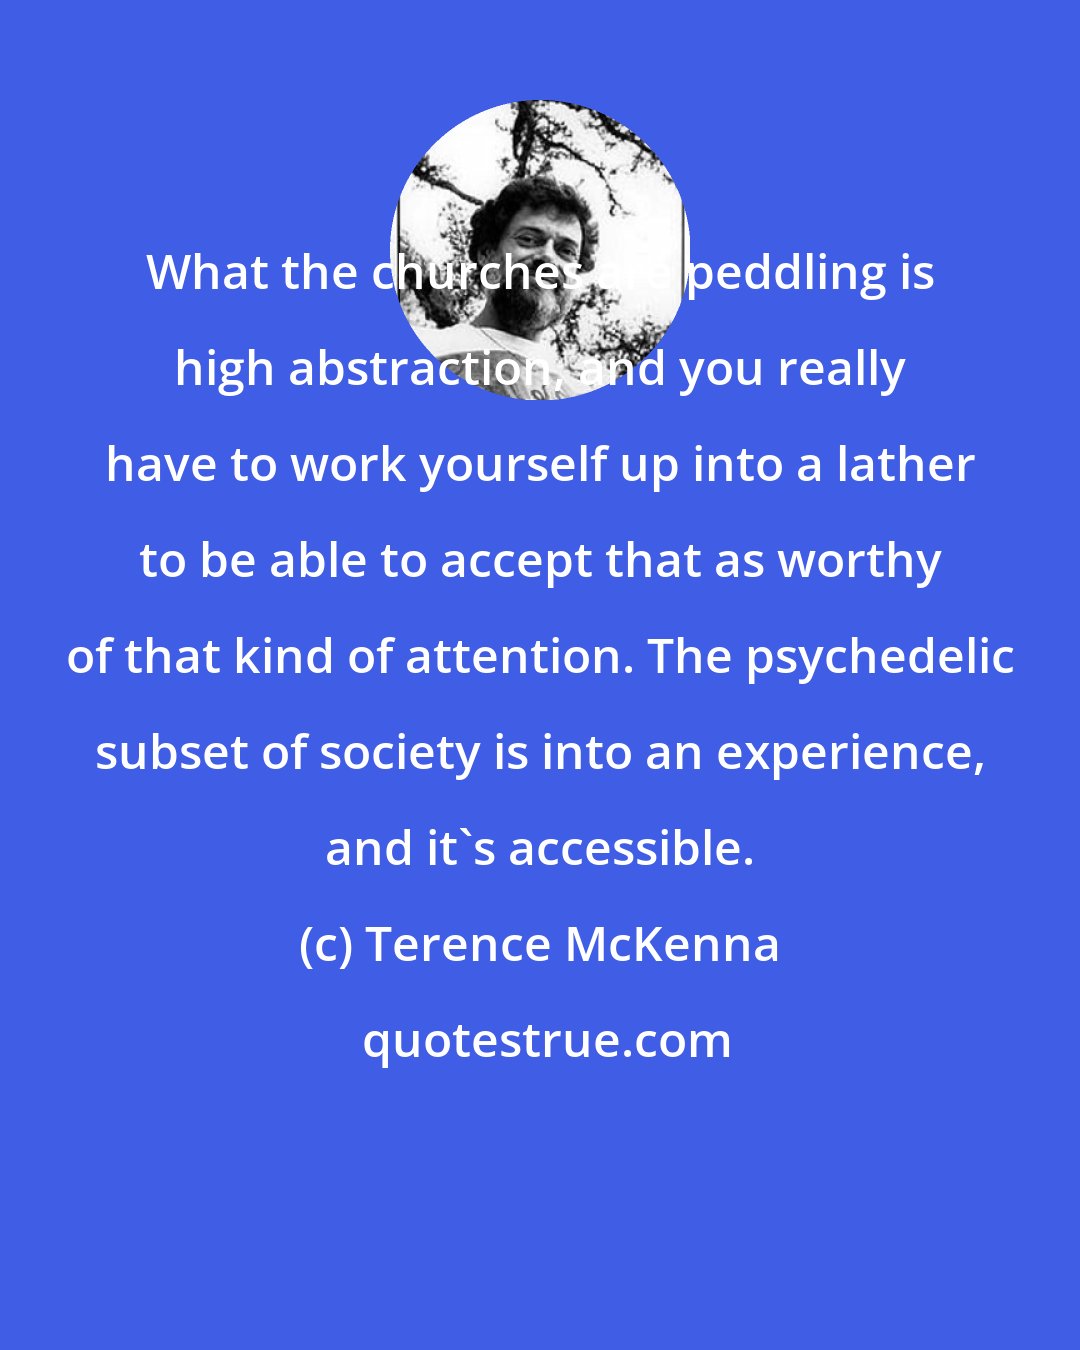 Terence McKenna: What the churches are peddling is high abstraction, and you really have to work yourself up into a lather to be able to accept that as worthy of that kind of attention. The psychedelic subset of society is into an experience, and it's accessible.